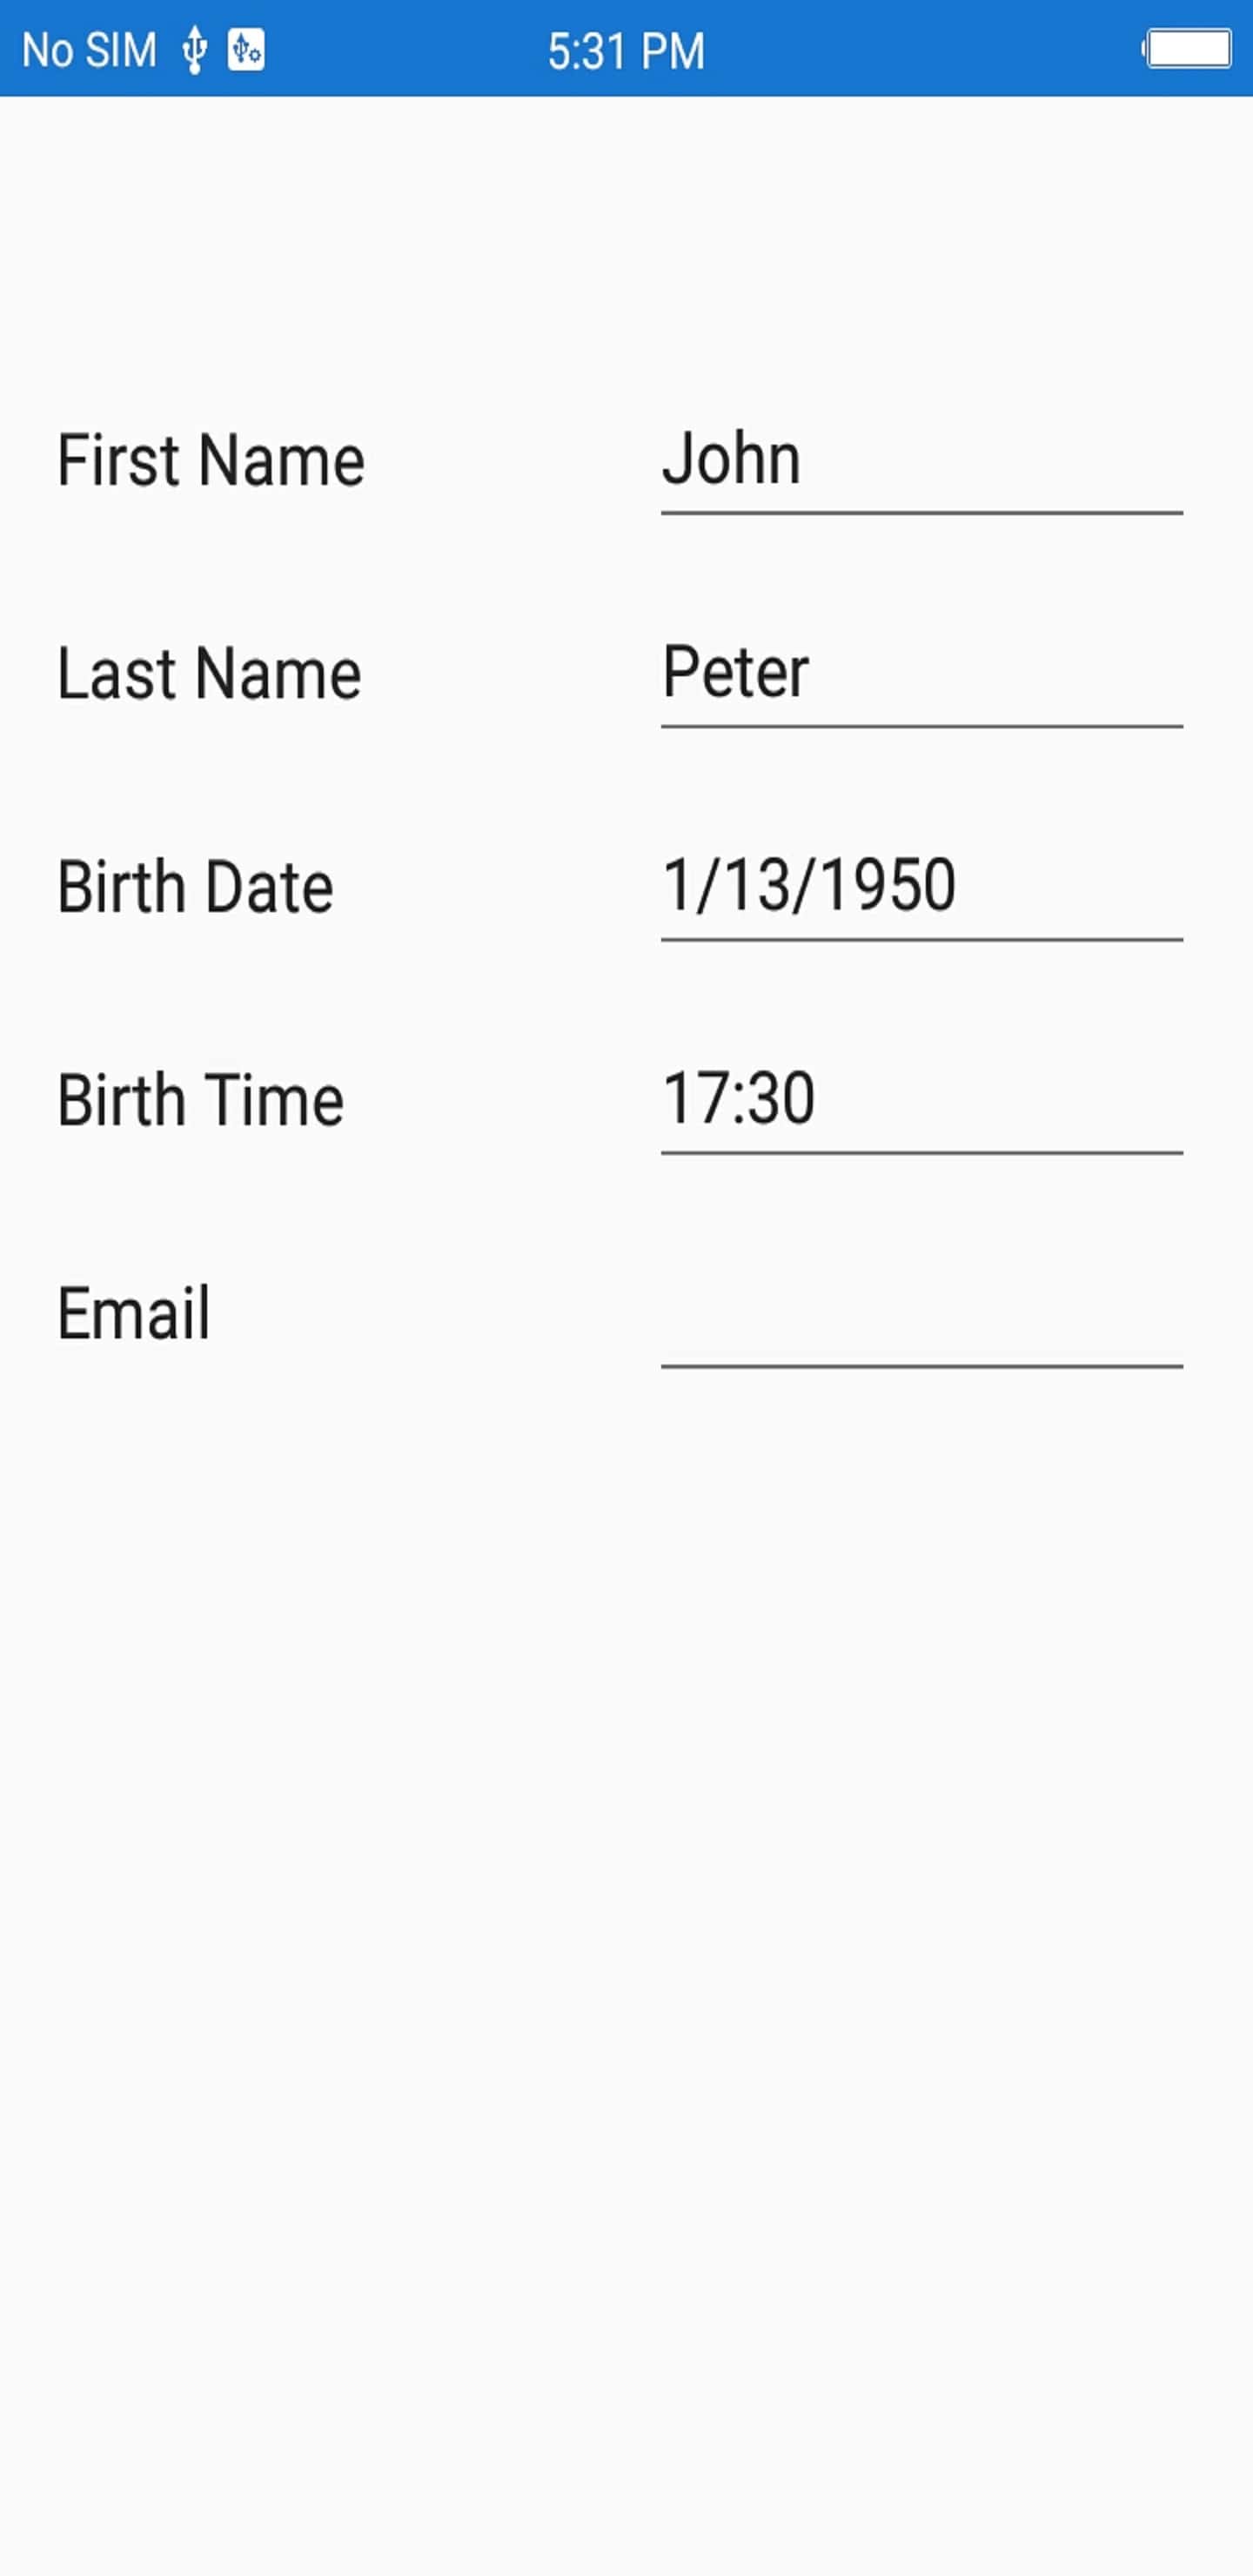 Setting time format to data form time item in Xamarin.Forms DataForm